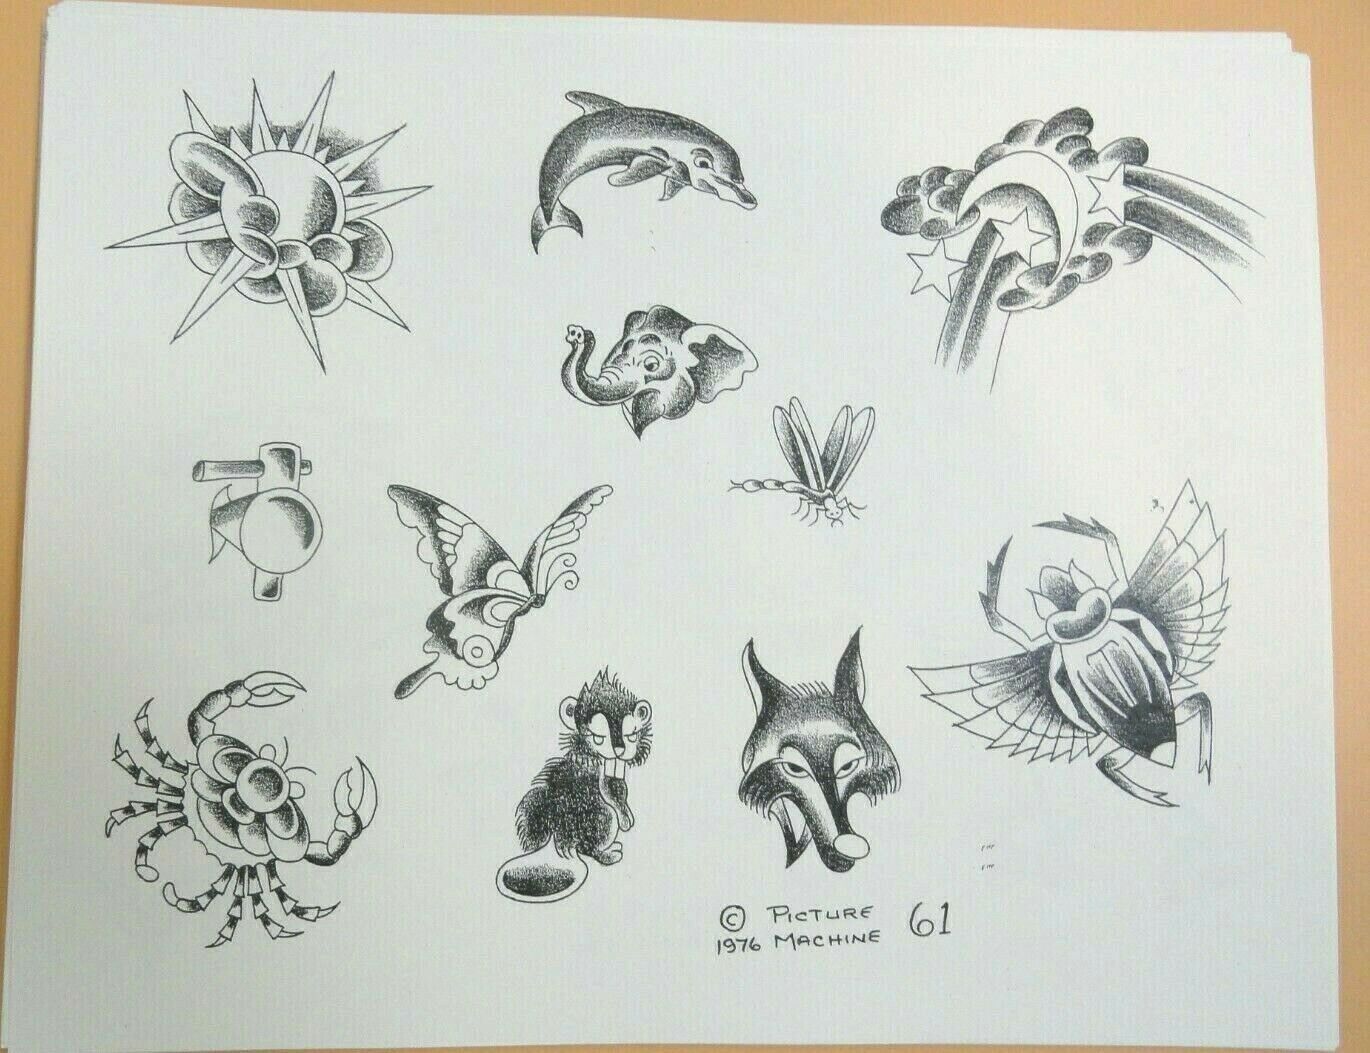 Vintage 1976 Picture Machine Spaulding Rogers Tattoo Flash Sheet 61 Dolphin Fox